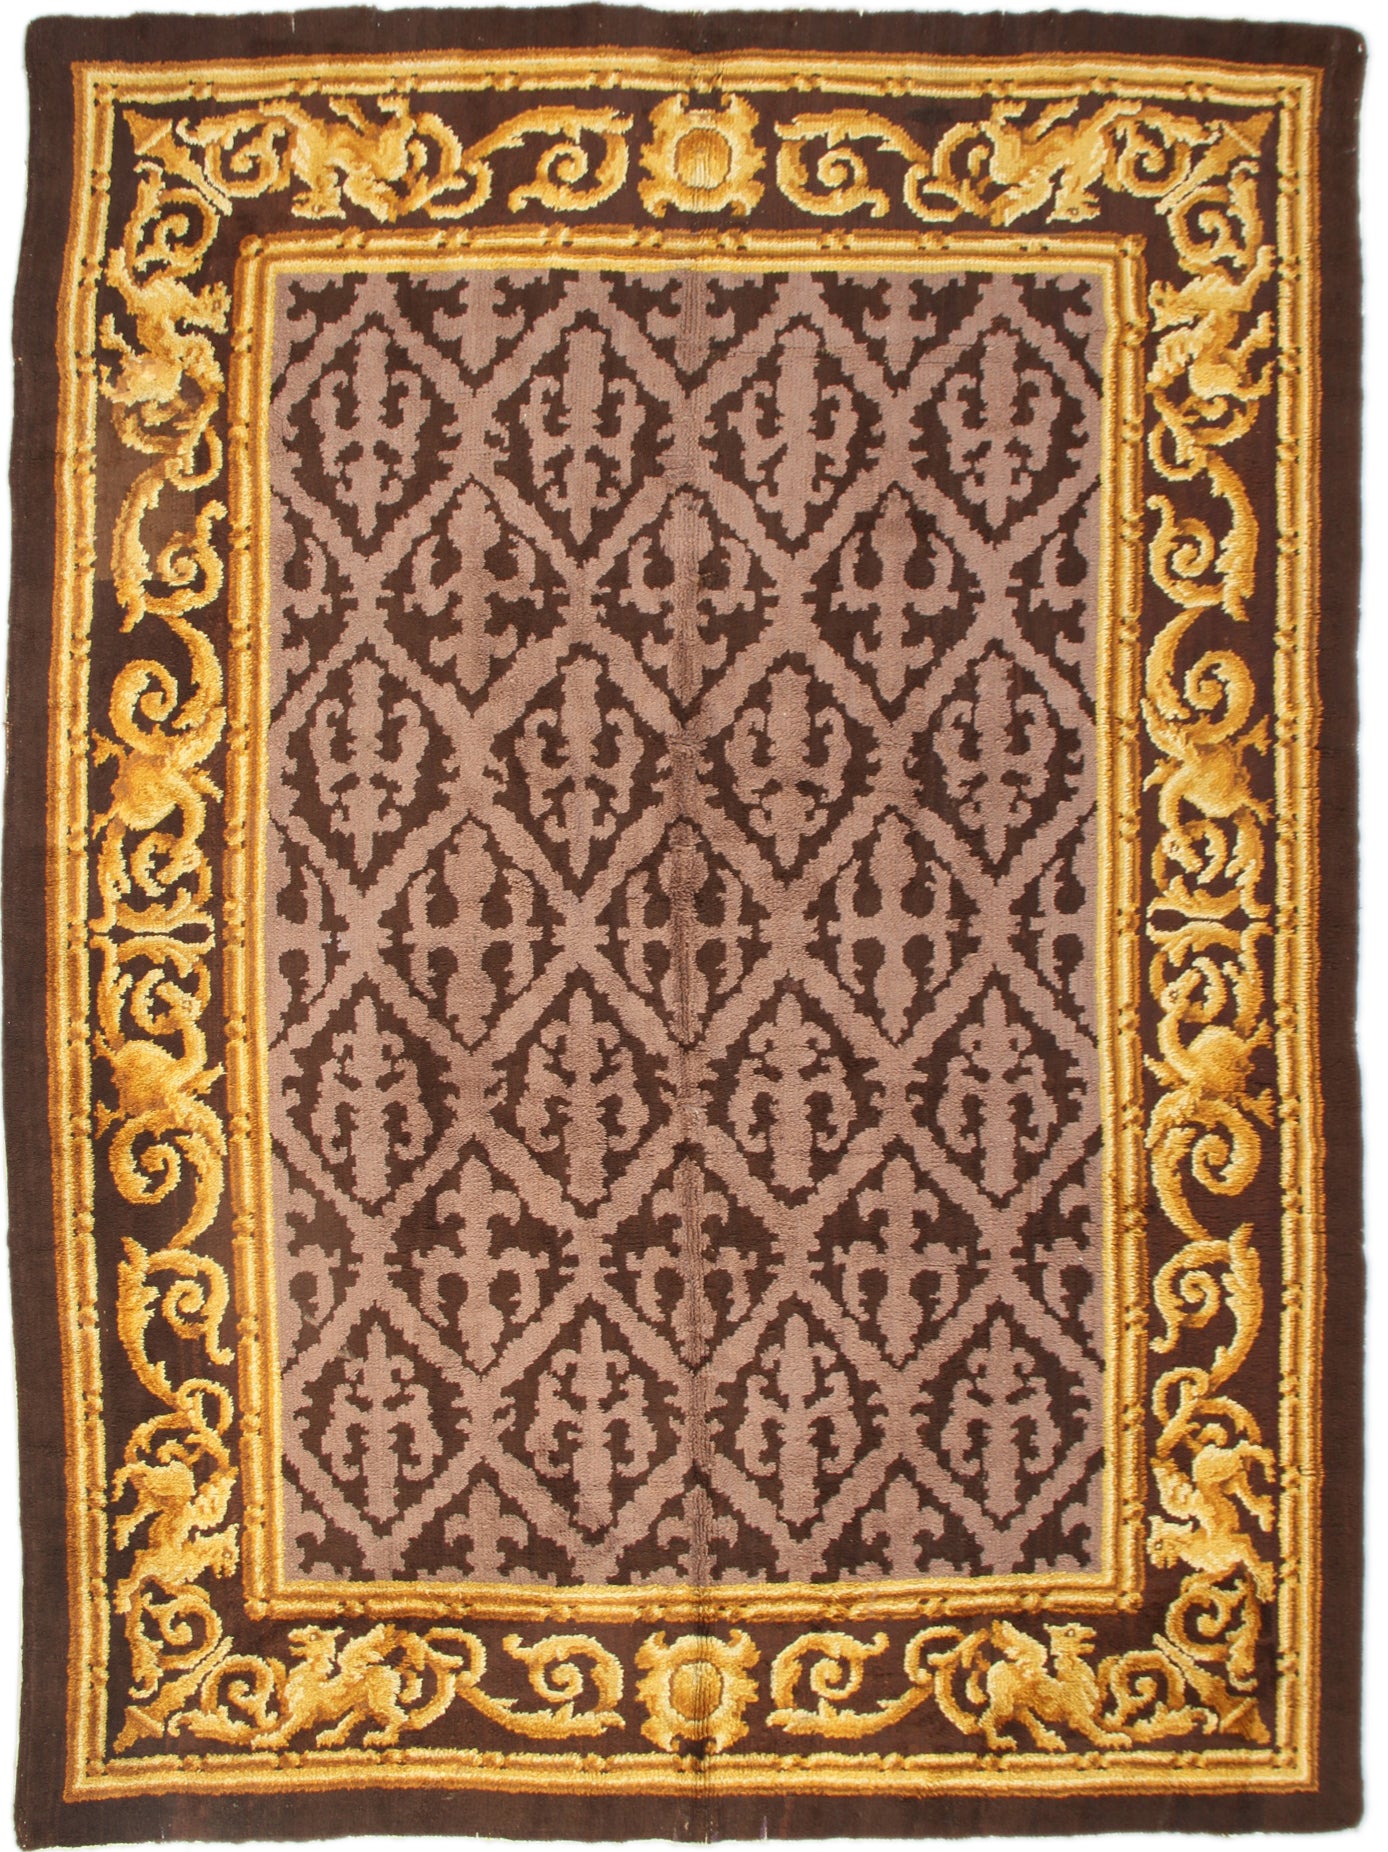 9'x13' Gold and Brown Antique Ventage Spanish Savonnerie Rug